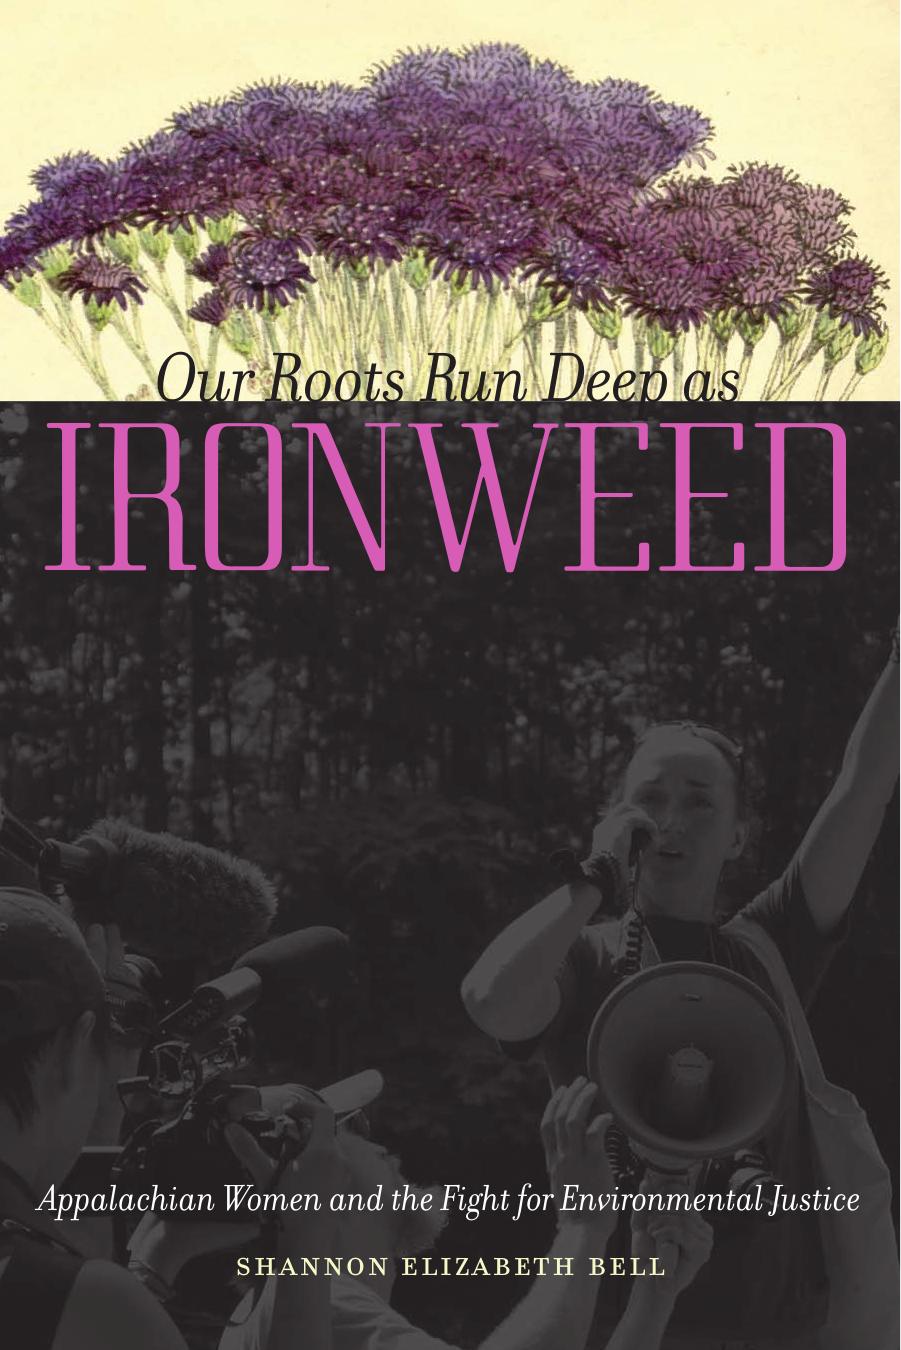 Our Roots Run Deep as Ironweed: Appalachian Women and the Fight for Environmental Justice by Shannon Elizabeth Bell